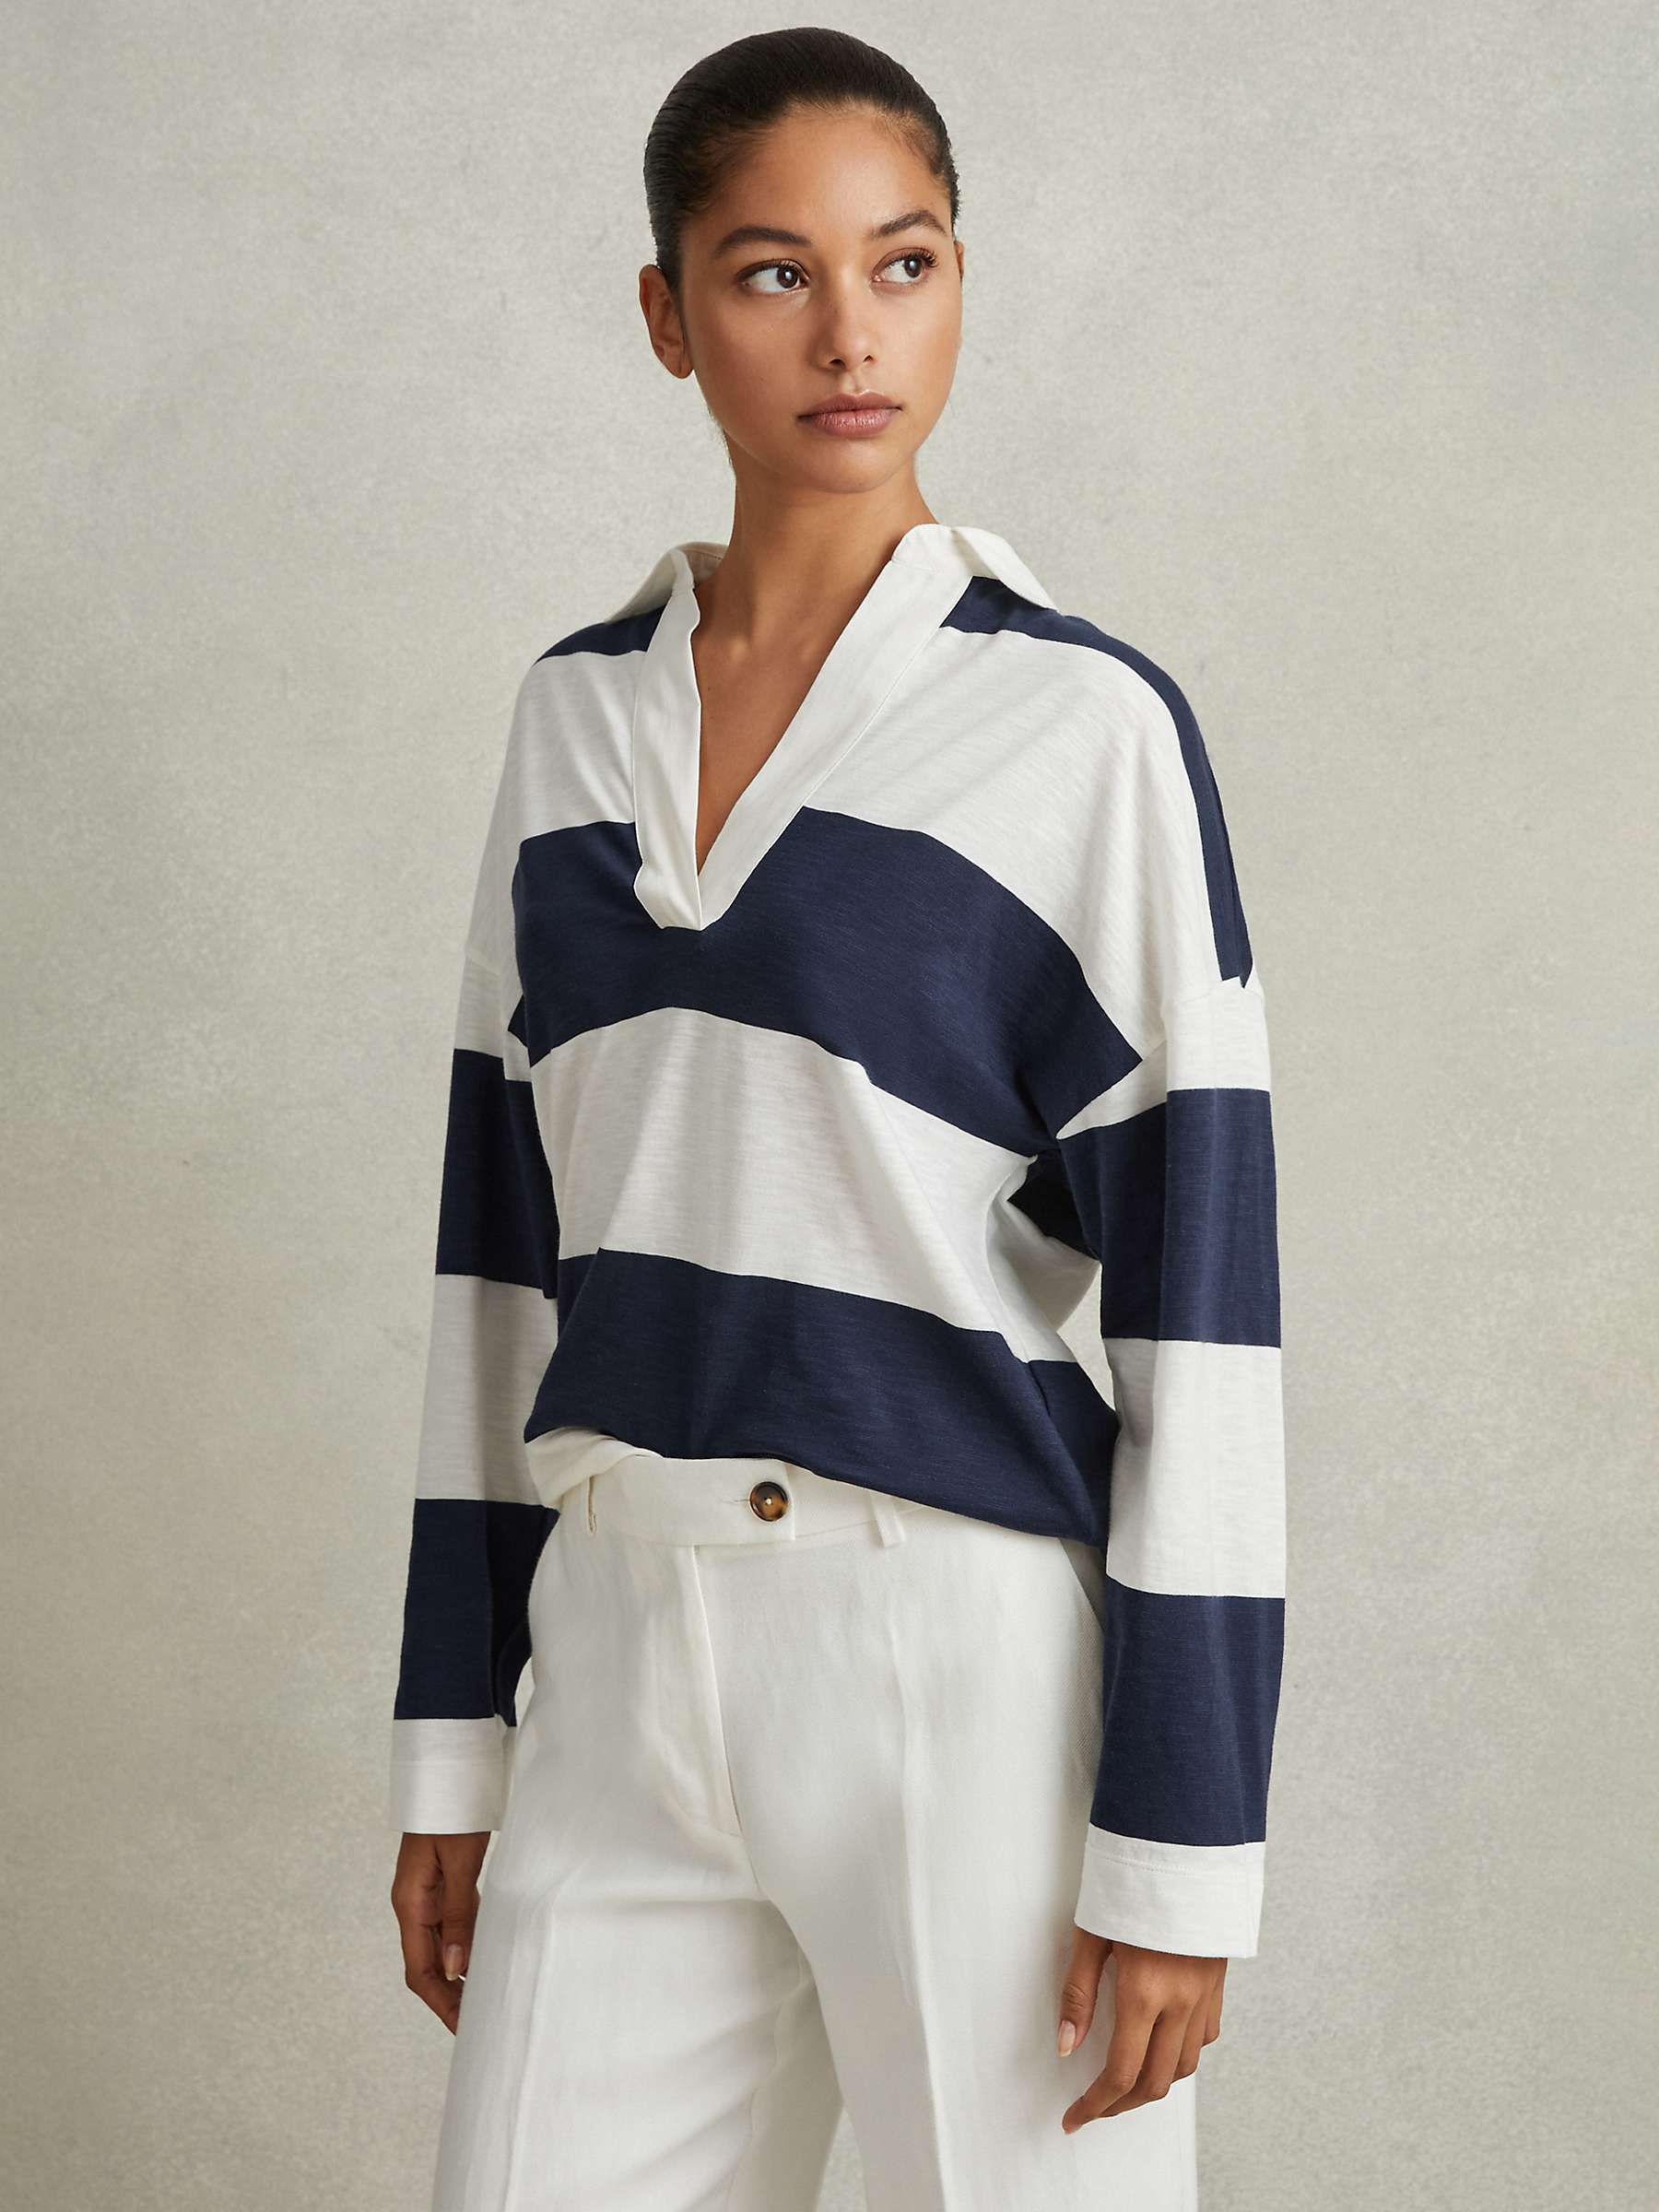 Buy Reiss Abigail Striped Open Collar Rugby Style Top, Navy/Ivory Online at johnlewis.com